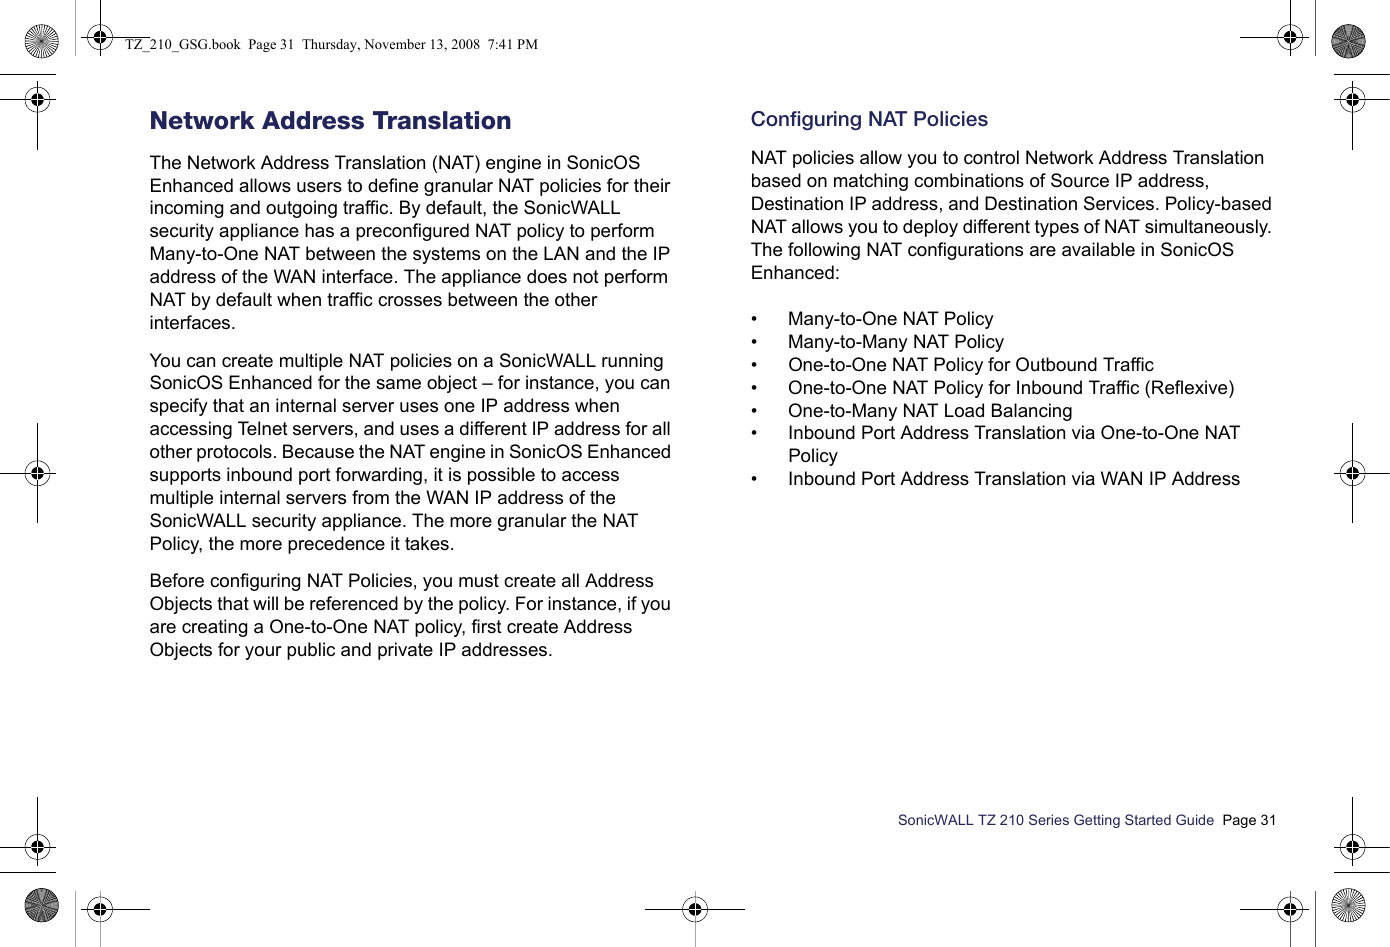 SonicWALL TZ 210 Series Getting Started Guide  Page 31Network Address TranslationThe Network Address Translation (NAT) engine in SonicOS Enhanced allows users to define granular NAT policies for their incoming and outgoing traffic. By default, the SonicWALL security appliance has a preconfigured NAT policy to perform Many-to-One NAT between the systems on the LAN and the IP address of the WAN interface. The appliance does not perform NAT by default when traffic crosses between the other interfaces. You can create multiple NAT policies on a SonicWALL running SonicOS Enhanced for the same object – for instance, you can specify that an internal server uses one IP address when accessing Telnet servers, and uses a different IP address for all other protocols. Because the NAT engine in SonicOS Enhanced supports inbound port forwarding, it is possible to access multiple internal servers from the WAN IP address of the SonicWALL security appliance. The more granular the NAT Policy, the more precedence it takes. Before configuring NAT Policies, you must create all Address Objects that will be referenced by the policy. For instance, if you are creating a One-to-One NAT policy, first create Address Objects for your public and private IP addresses. Configuring NAT PoliciesNAT policies allow you to control Network Address Translation based on matching combinations of Source IP address, Destination IP address, and Destination Services. Policy-based NAT allows you to deploy different types of NAT simultaneously. The following NAT configurations are available in SonicOS Enhanced:• Many-to-One NAT Policy• Many-to-Many NAT Policy• One-to-One NAT Policy for Outbound Traffic• One-to-One NAT Policy for Inbound Traffic (Reflexive)• One-to-Many NAT Load Balancing• Inbound Port Address Translation via One-to-One NAT Policy• Inbound Port Address Translation via WAN IP AddressTZ_210_GSG.book  Page 31  Thursday, November 13, 2008  7:41 PM